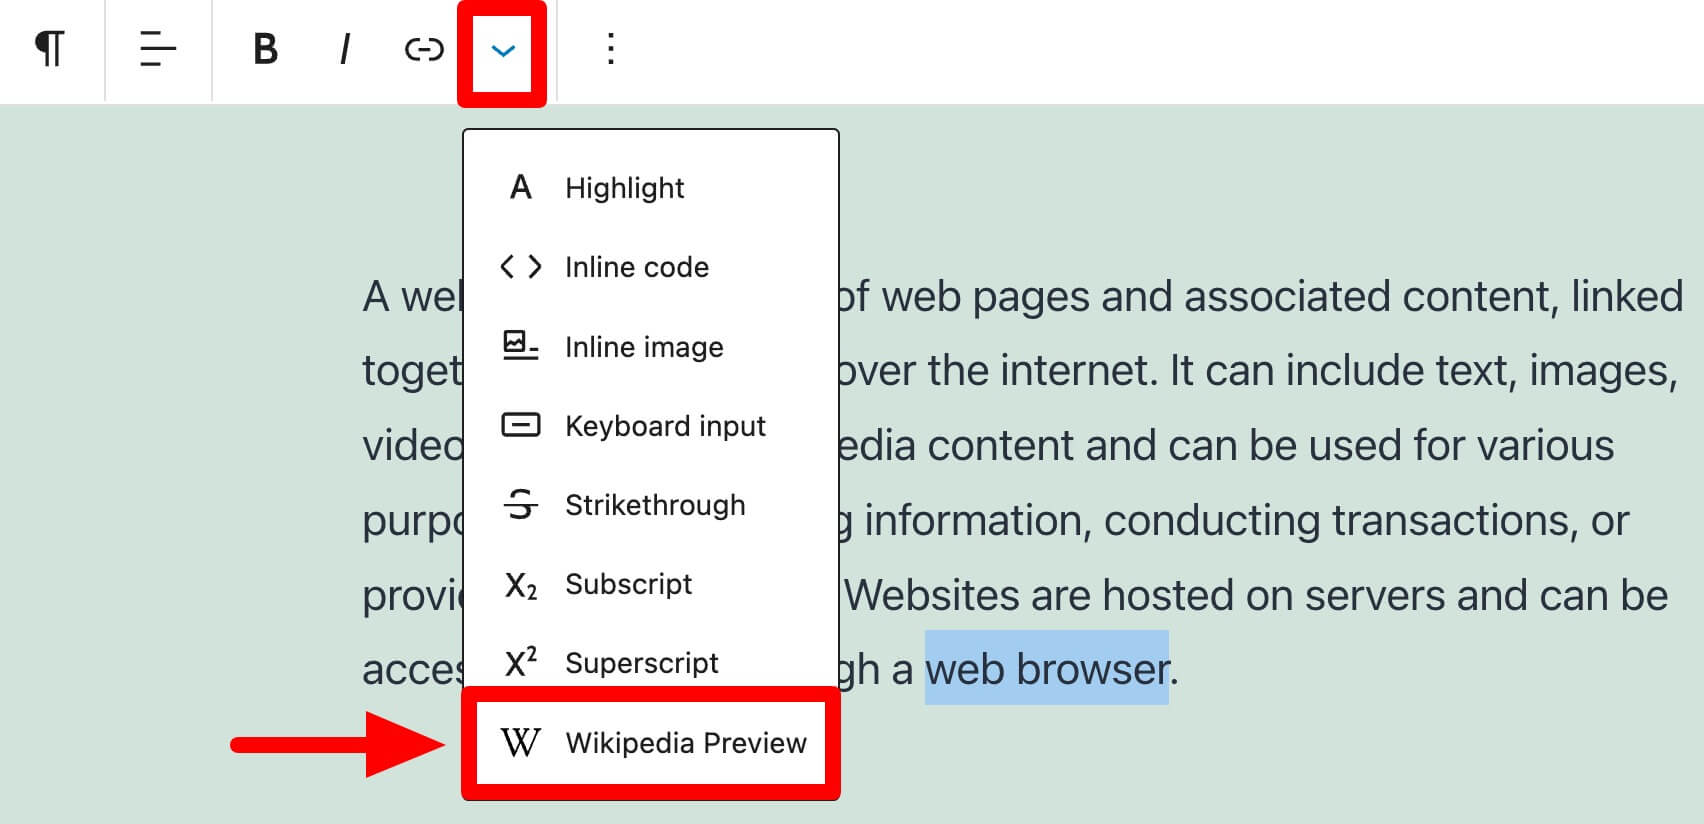 Wikipedia Preview option under More option in Toolbar